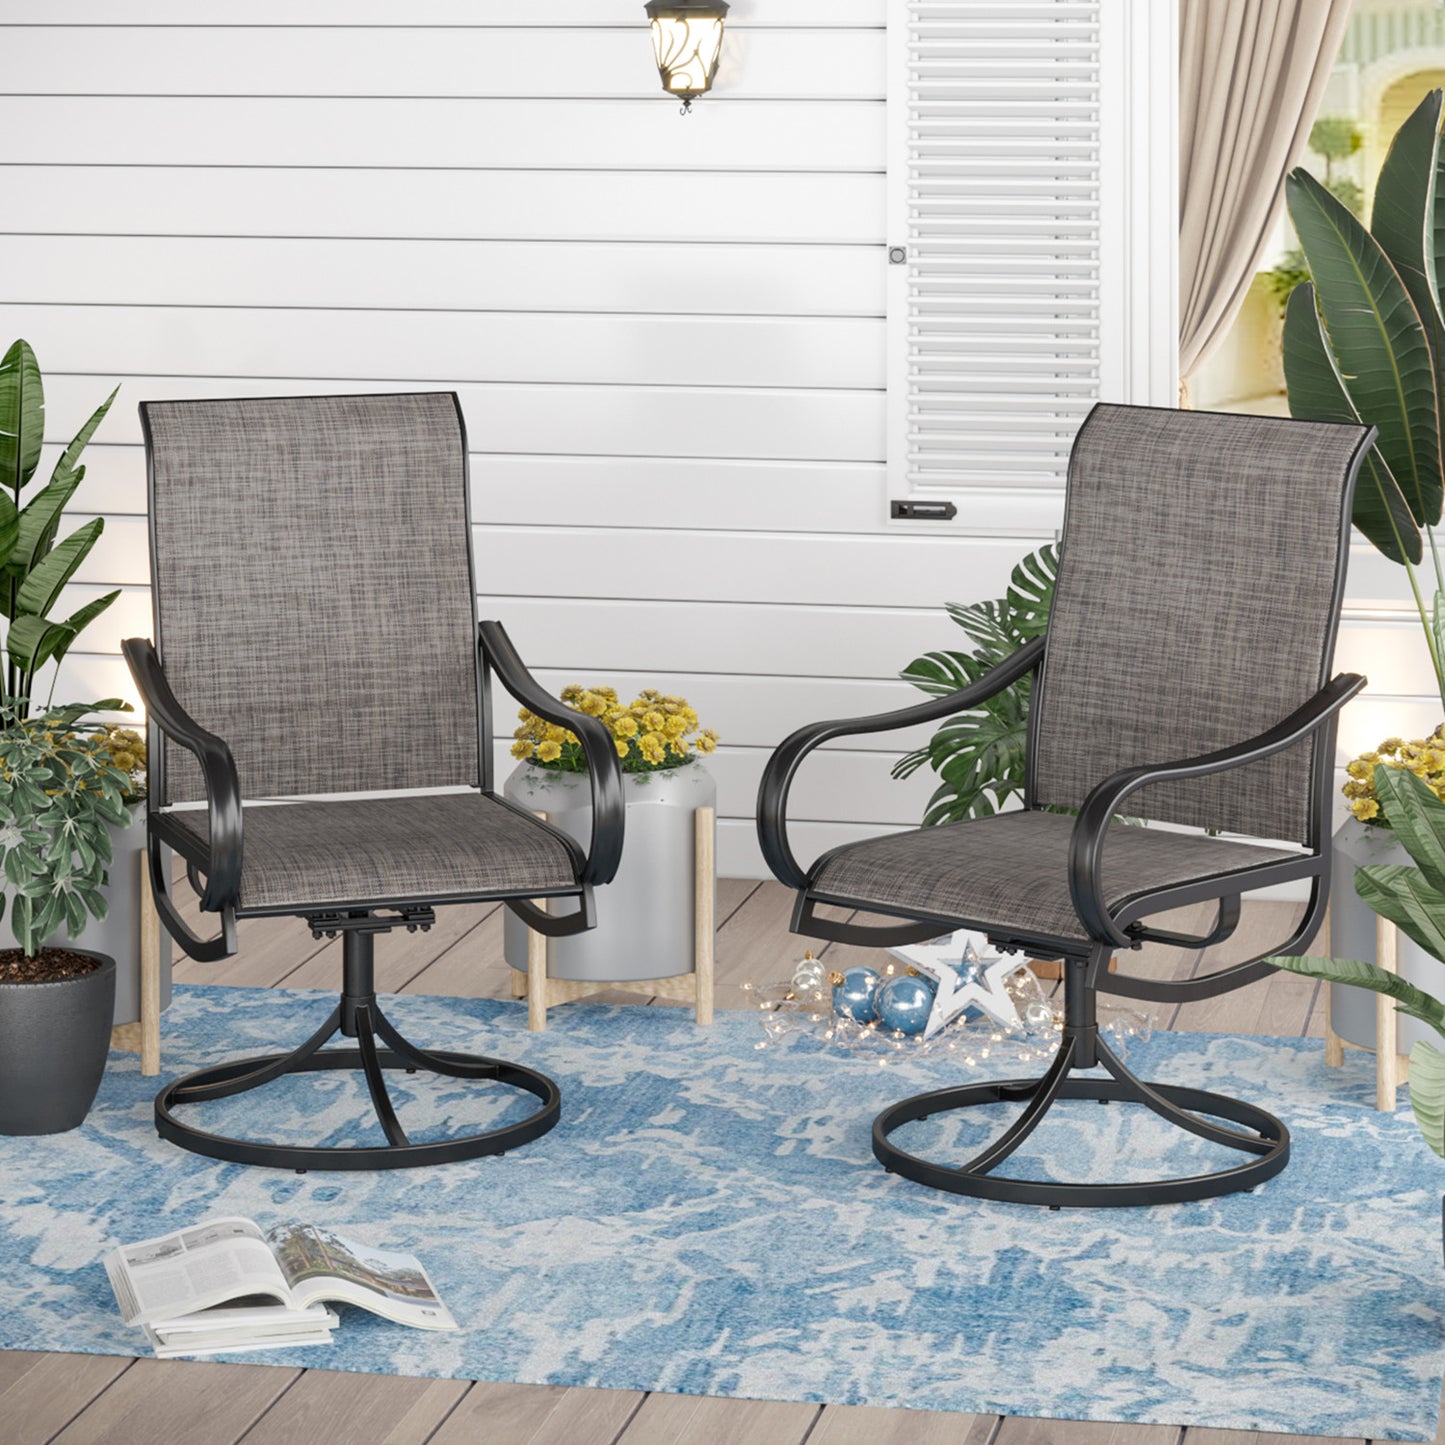 Sophia & William 2Pcs Patio Dining Swivel Chairs Set with Black Steel Frame